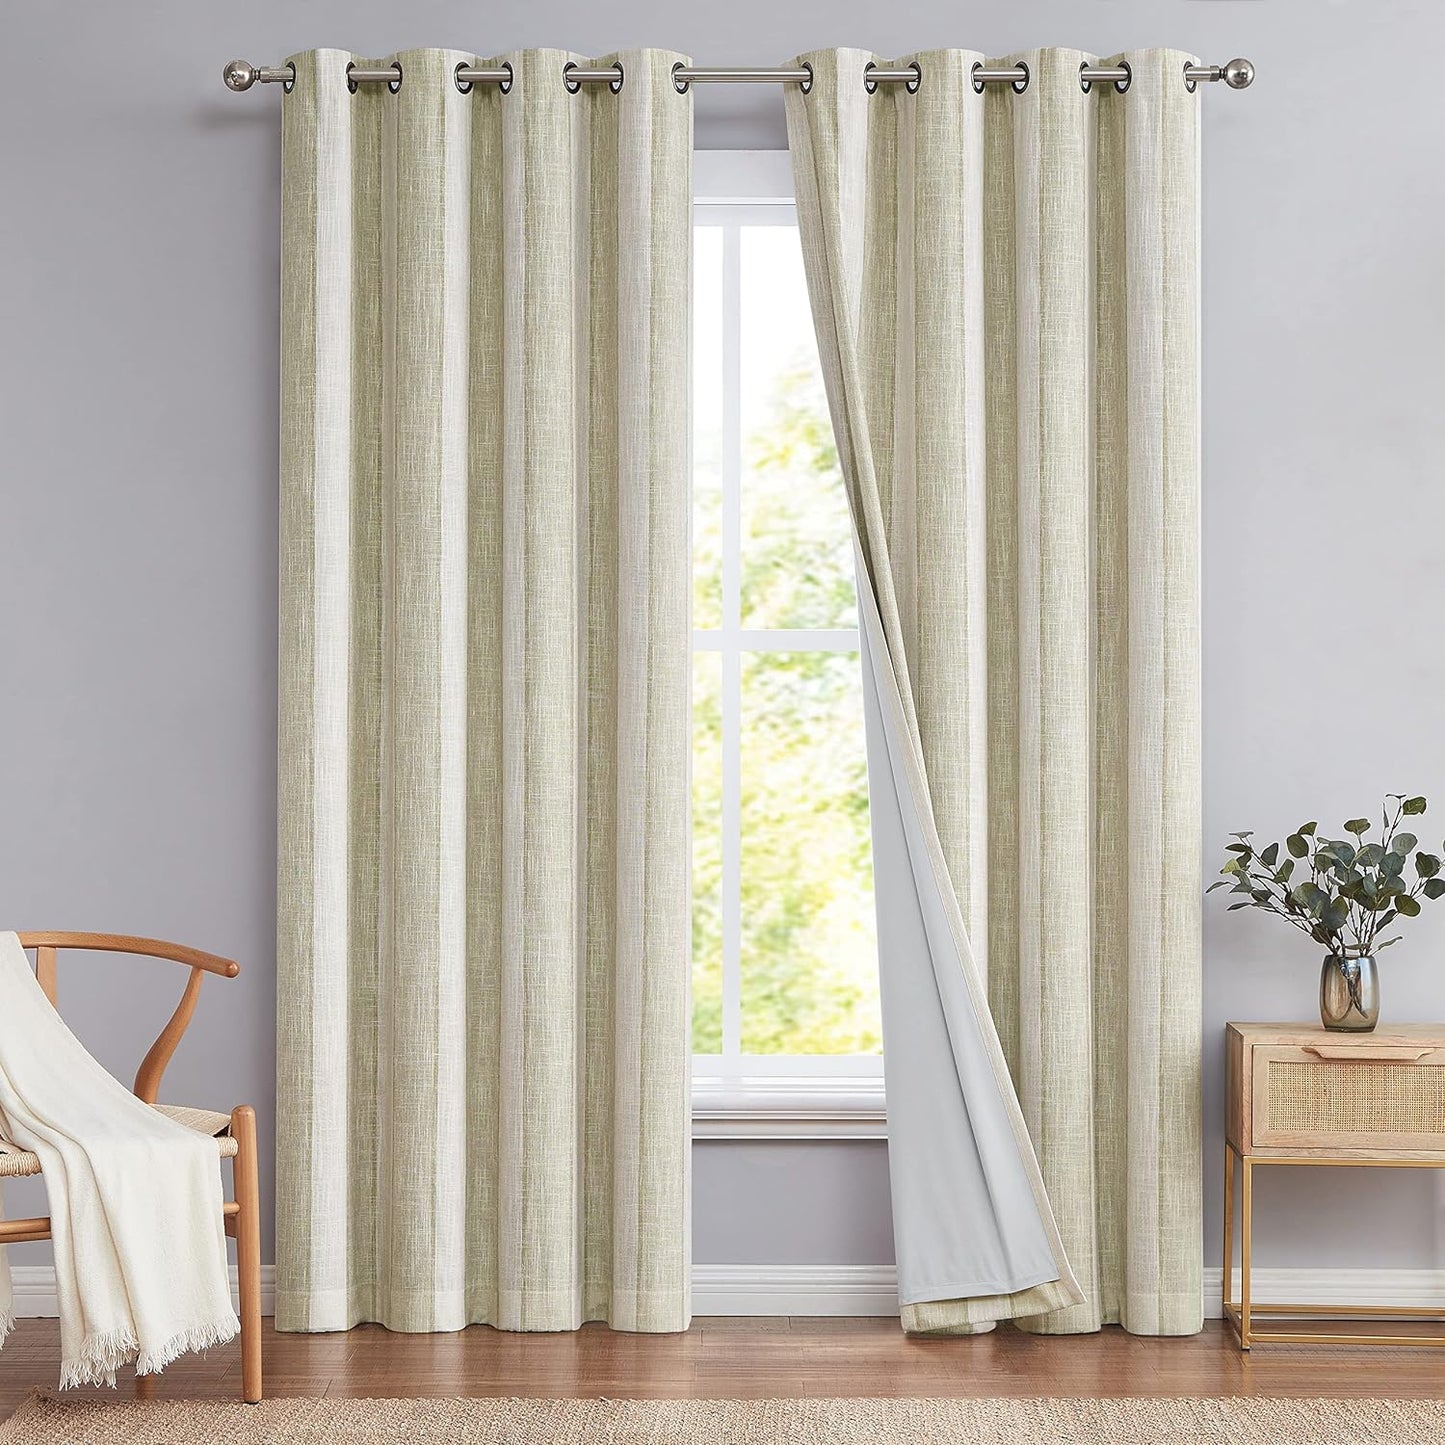 WEST LAKE Full Blackout Curtain Panel Grey Beige Vertical Stripe Window Treatment Grommets Thermal Insulated Noise Reducing 100 Blackout Drape for Living Room, Bedroom, 50"Wx84"L, 2 Panel, Gray/White  WEST LAKE Khaki 50"Wx95"L|2 Panels 